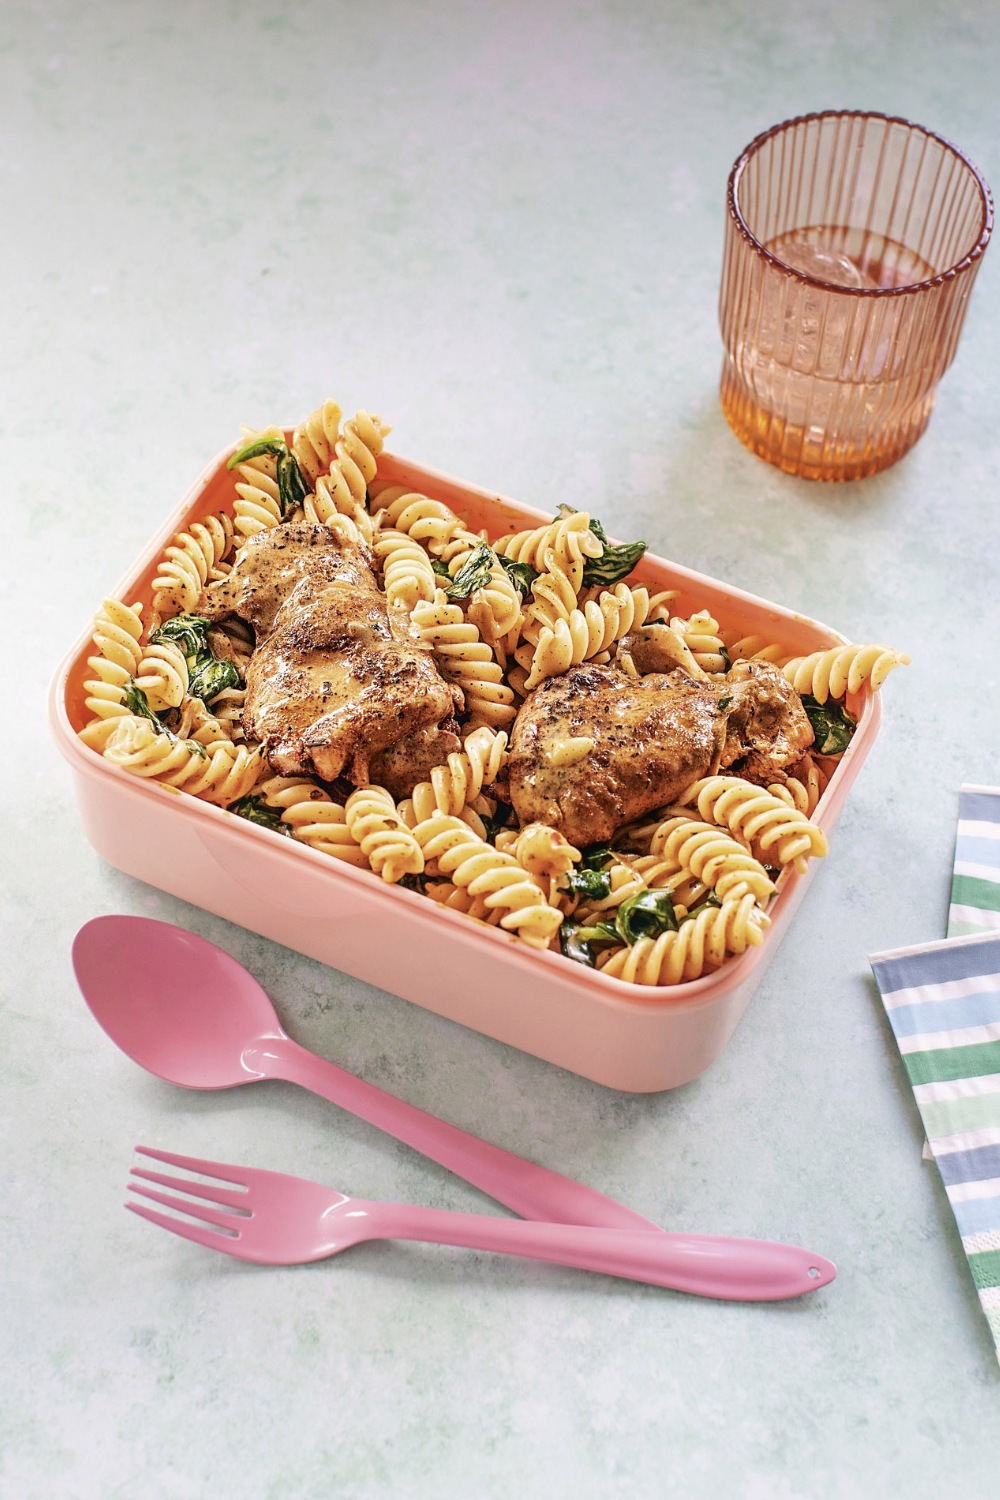 Slow Cooker Creamy Paprika Chicken Thighs with rotini pasta and spinach in a pink container.